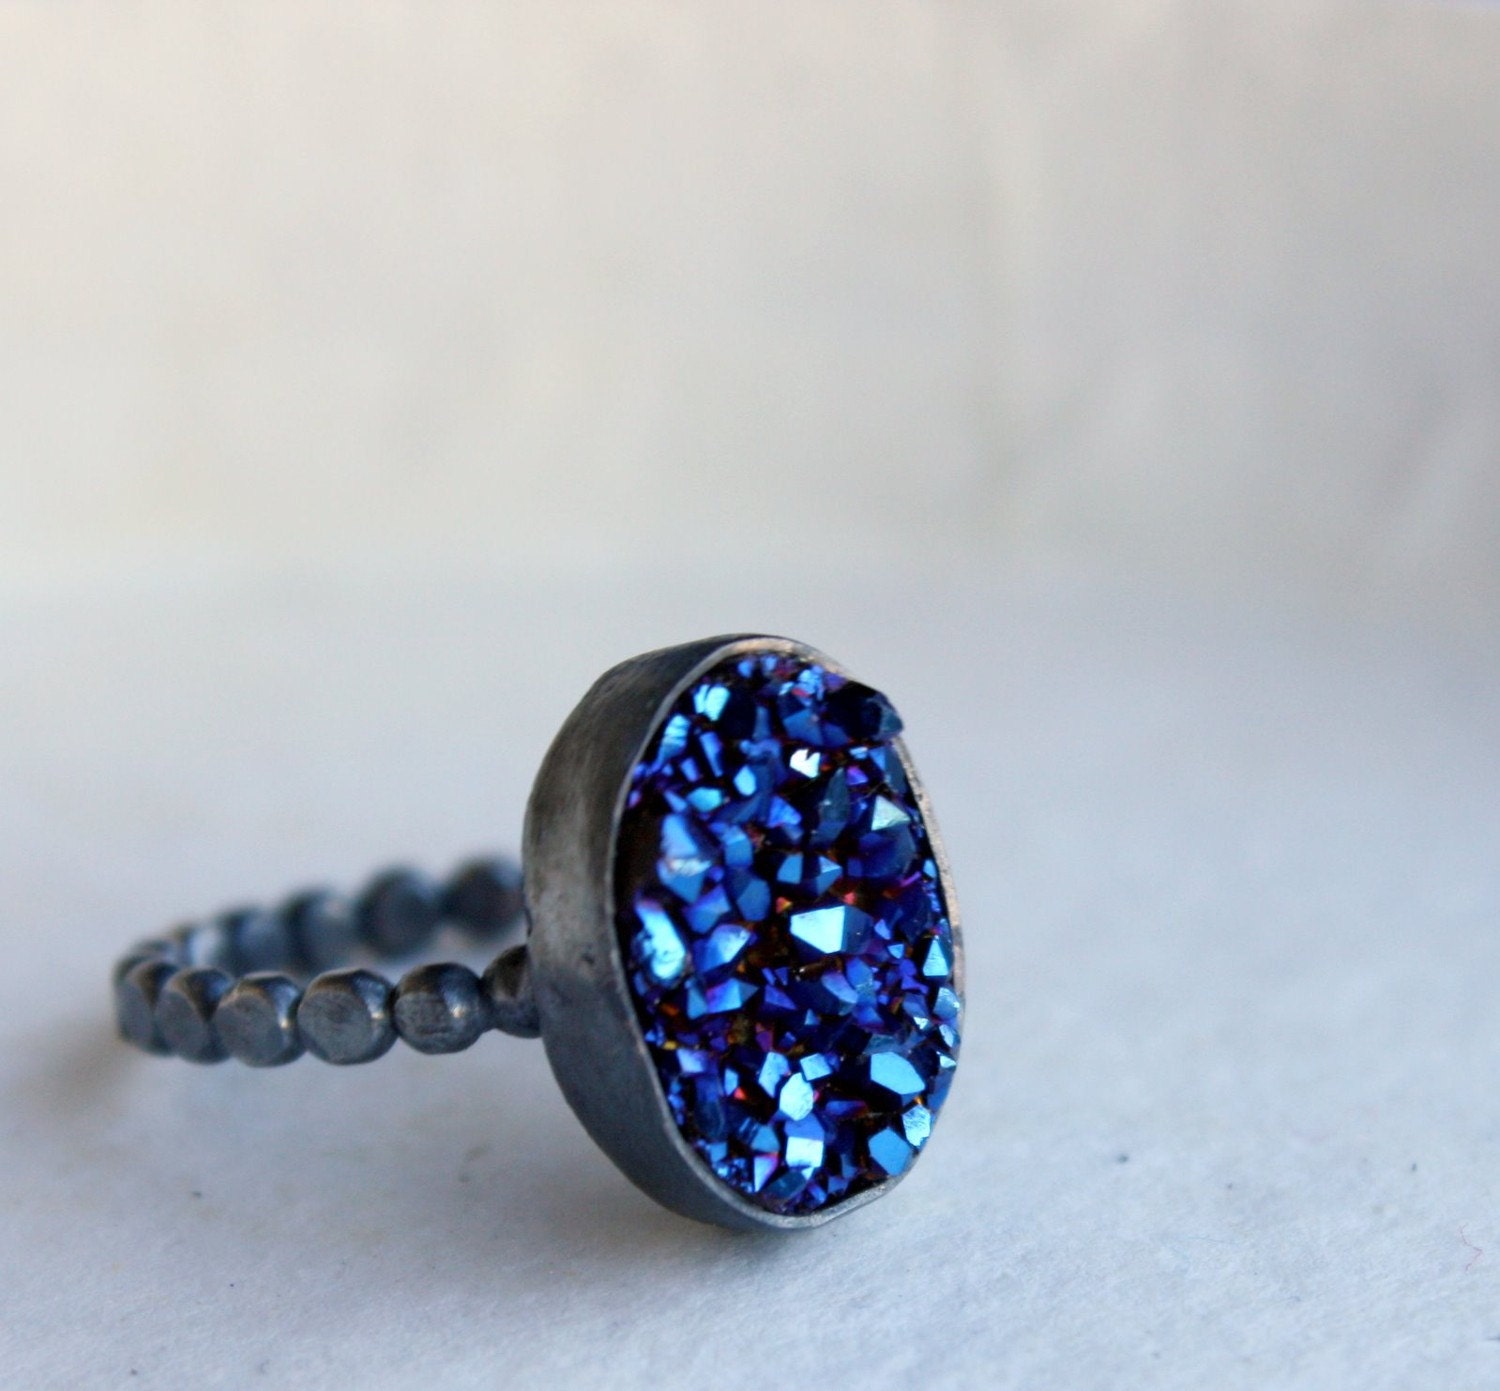 Midnight Blue Sparkling Drusy in Oxidized Sterling Silver handmade ring